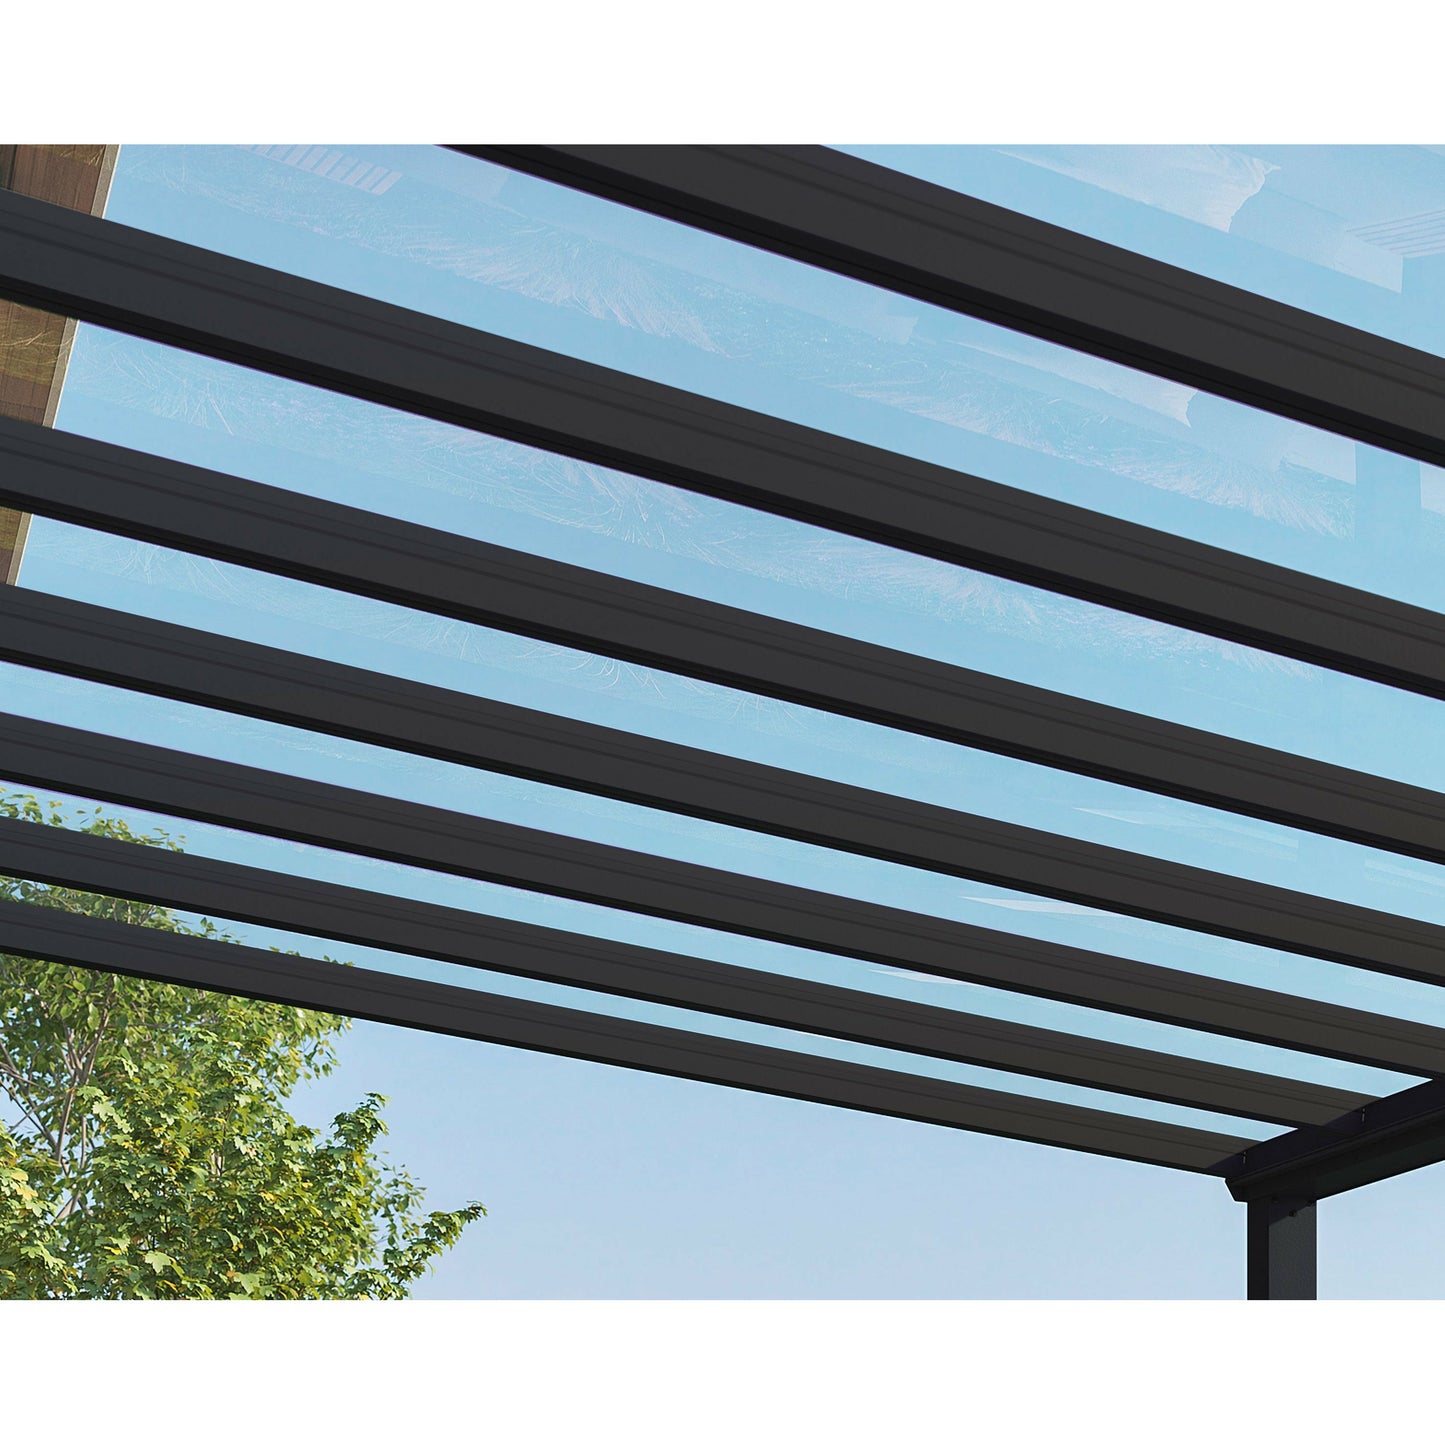 PALRAM STOCKHOLM PATIO COVER GRAY CLEAR 11x27